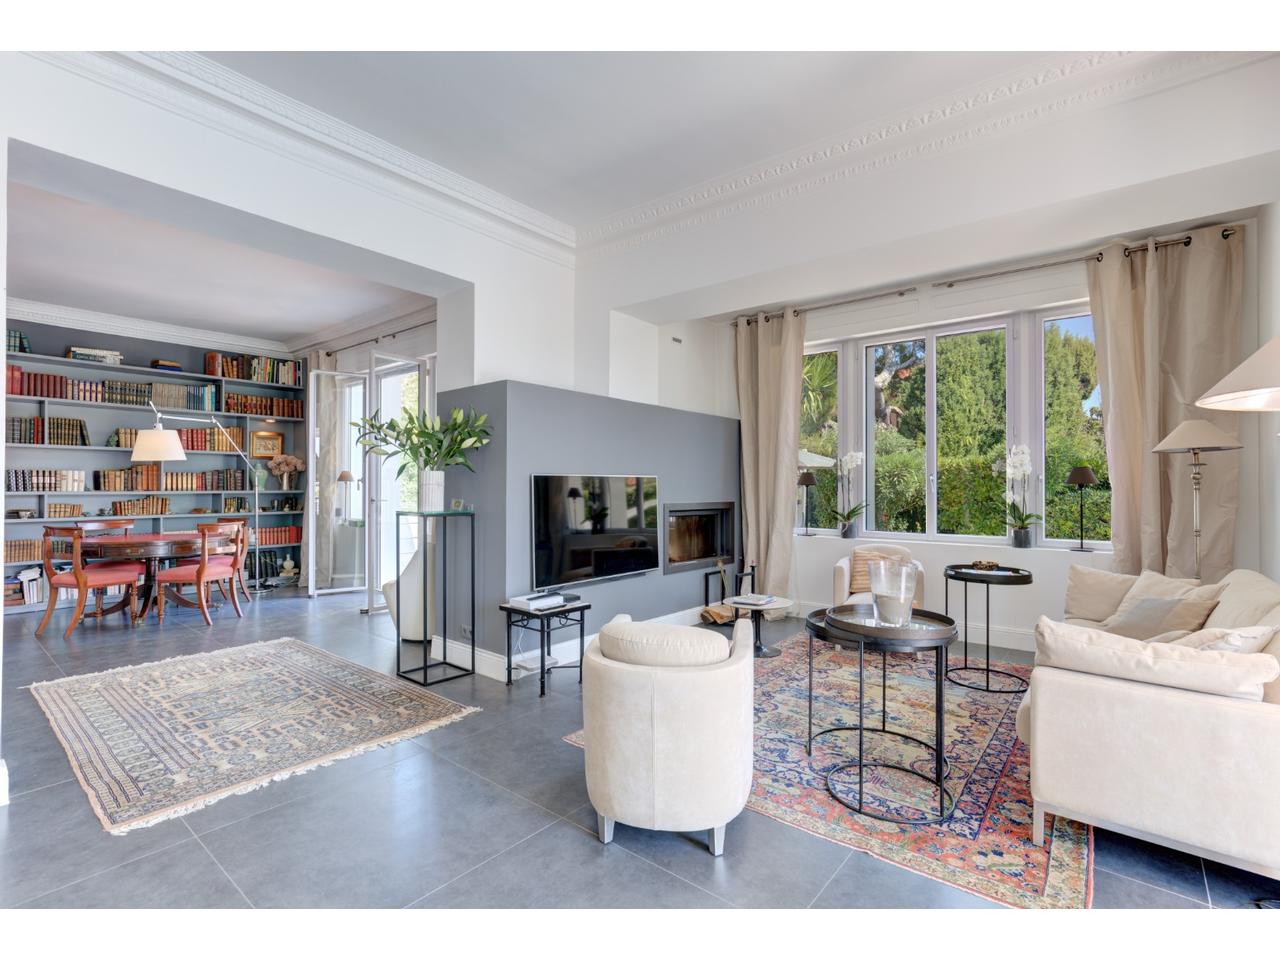 Nice Riviera - Agence Immobiliére Nice Côte d'Azur | House 6 Rooms 200m2 for sale 2,750,000 €